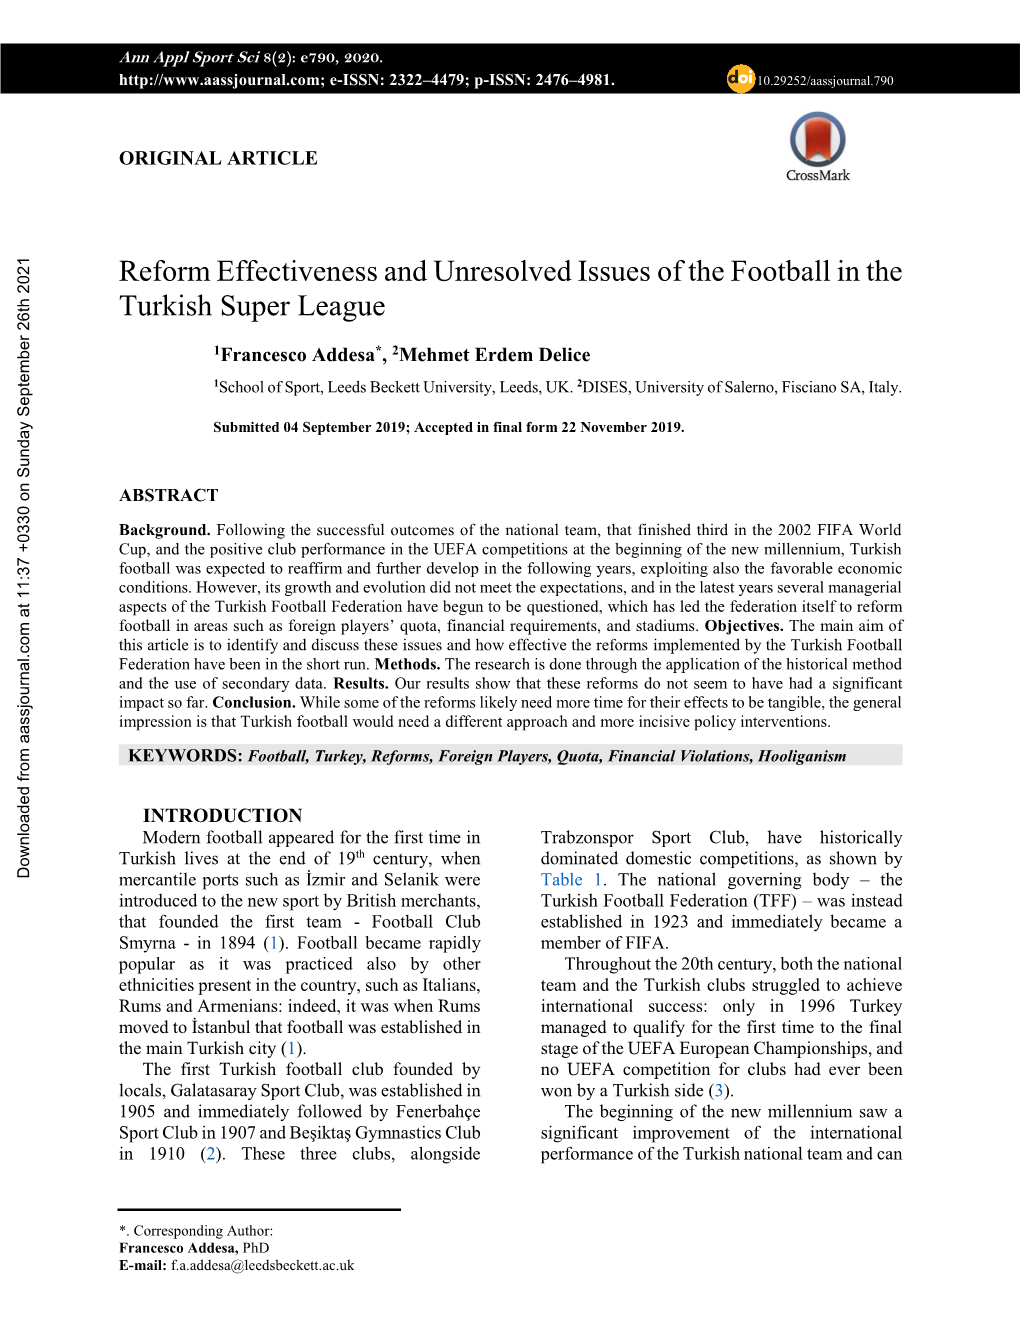 Reform Effectiveness and Unresolved Issues of the Football in the Turkish Super League